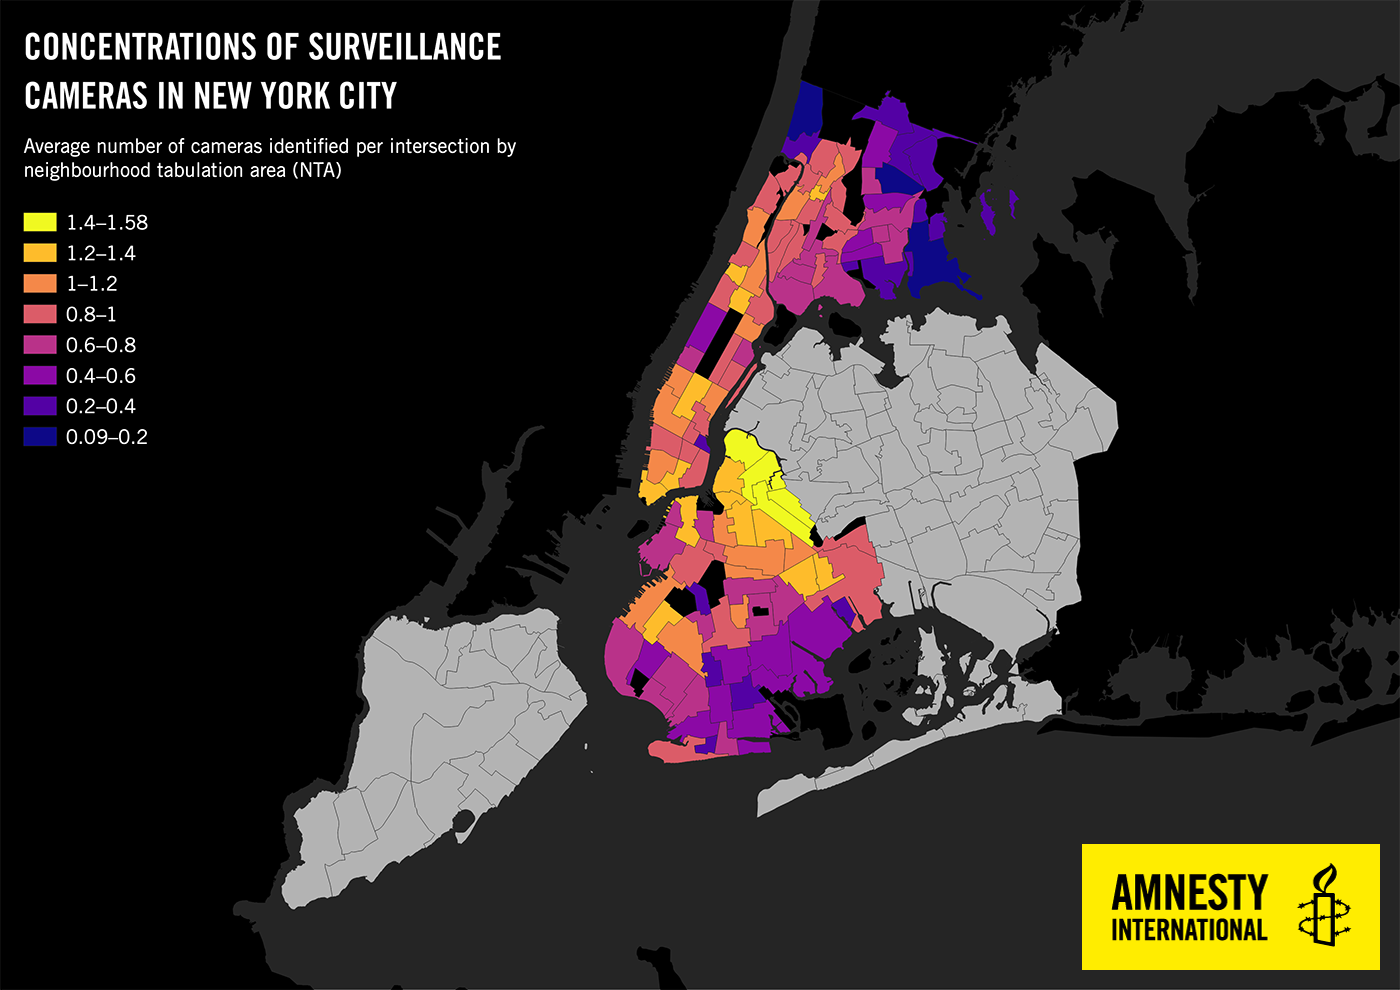 Surveillance city: NYPD can use more than 15,000 cameras to track people using facial recognition in Manhattan, Bronx and Brooklyn